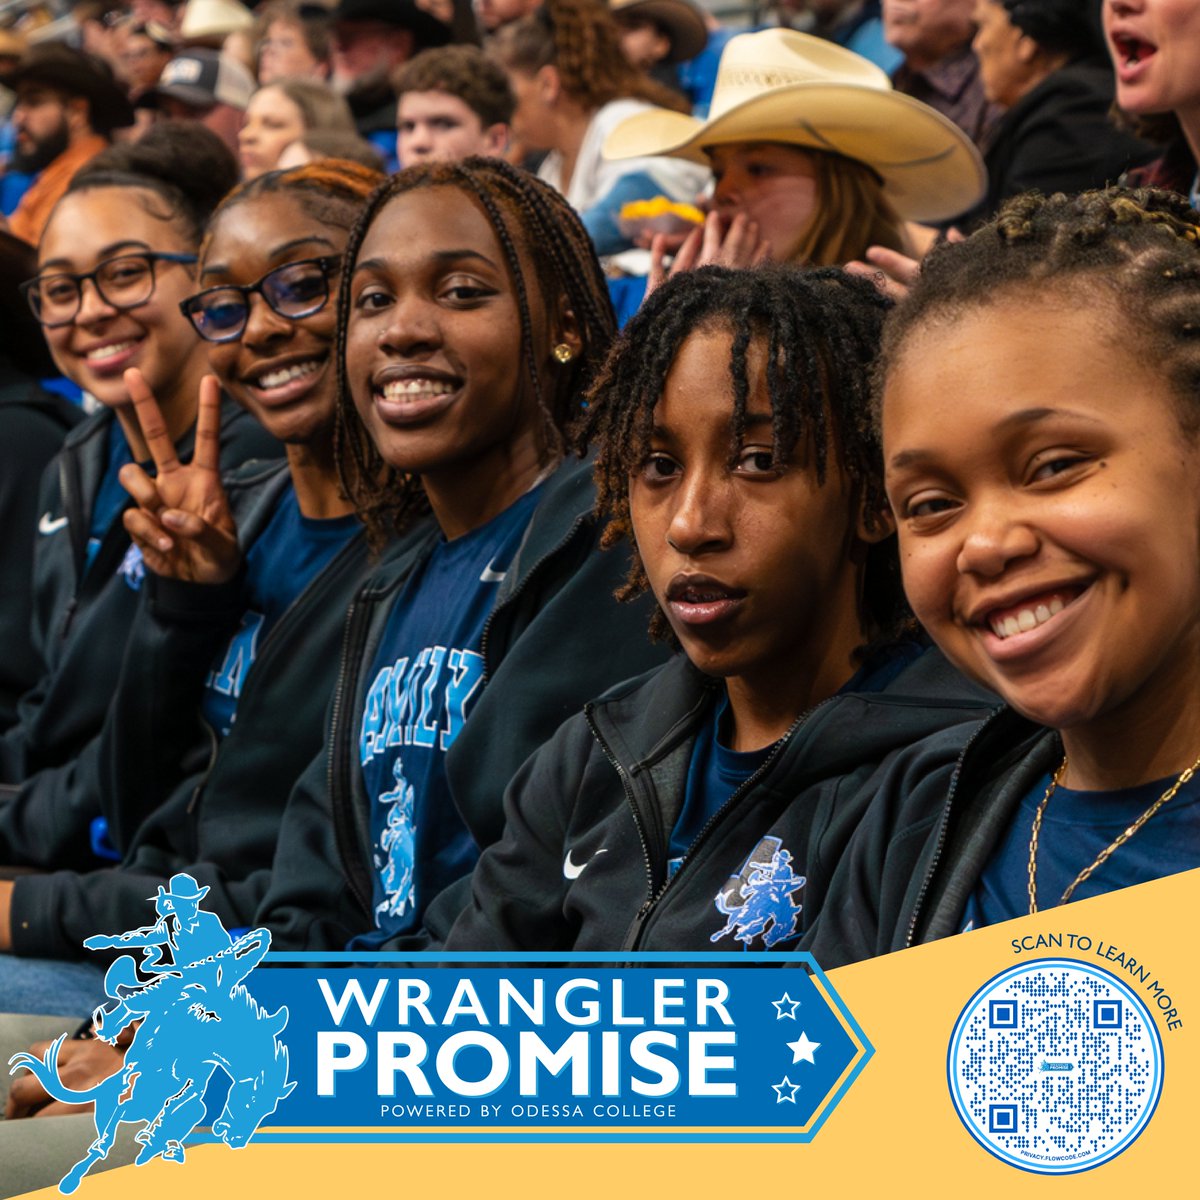 3 days to go...Wrangler Promise is on its way! 🏇 The deadline to sign the Pledge form is April 15th. 🖊 Do you know...? 👀 Wrangler Promise goals include: Reduce & eliminate achievement gaps for underrepresented students. For more information, visit: odessa.edu/future-student…